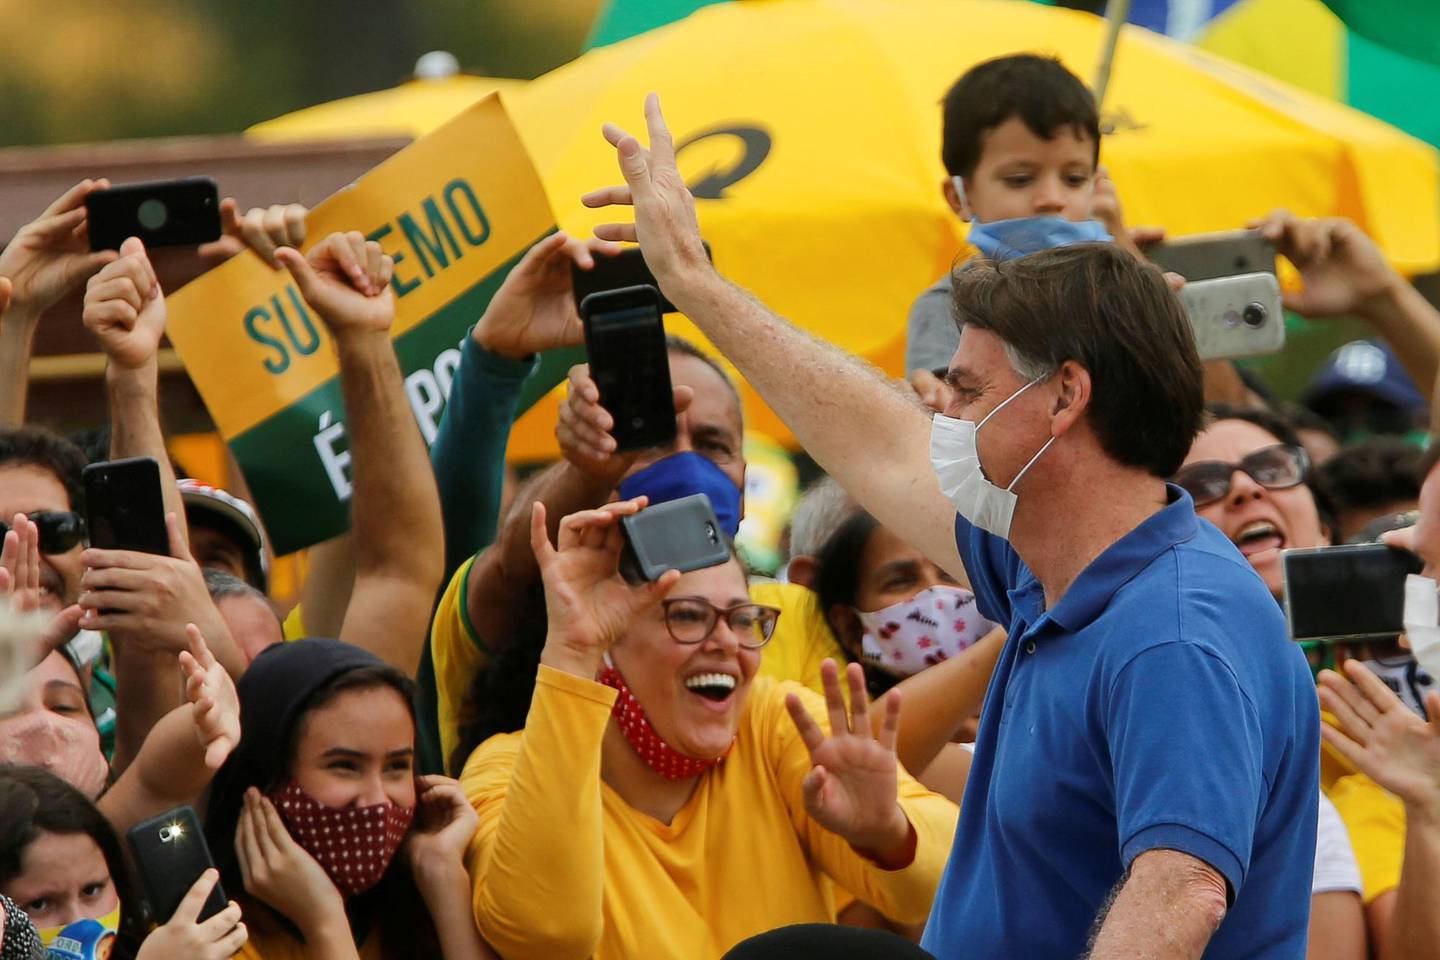 Brazil's President Jair Bolsonaro greets supporters during a protest against the President of the Chamber of Deputies Rodrigo Maia, Brazilian Supreme Court, quarantine and social distancing measures, amid the coronavirus disease (COVID-19) outbreak, in Brasilia, Brazil May 17, 2020. REUTERS/Adriano Machado